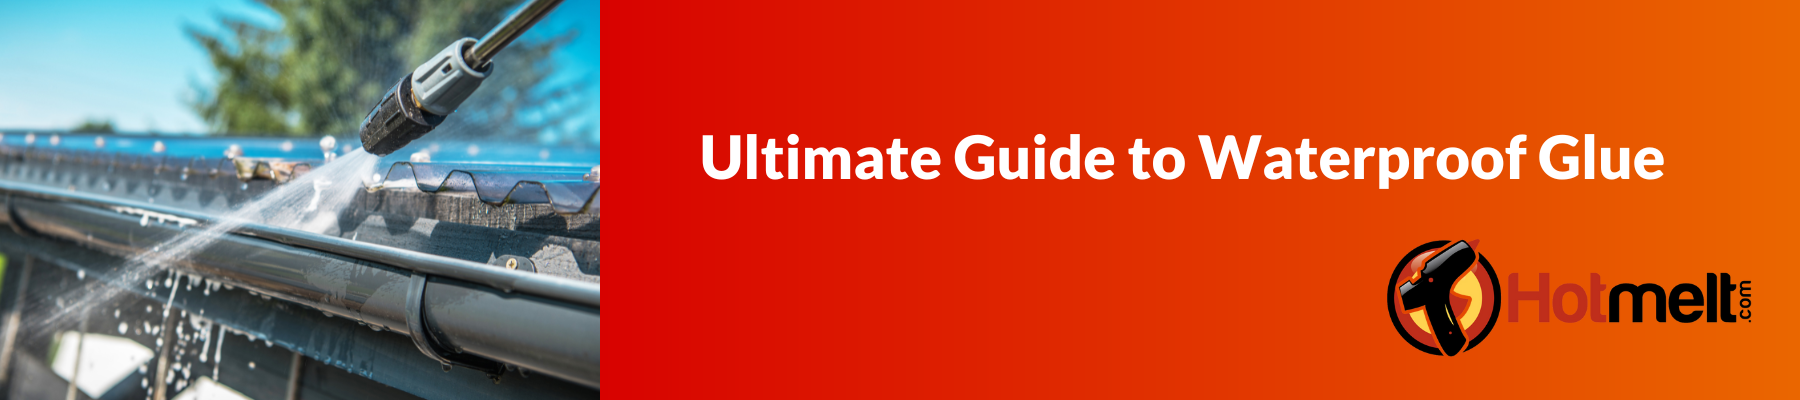 Ultimate Guide to Waterproof Glue: Understanding the Benefits of PUR H